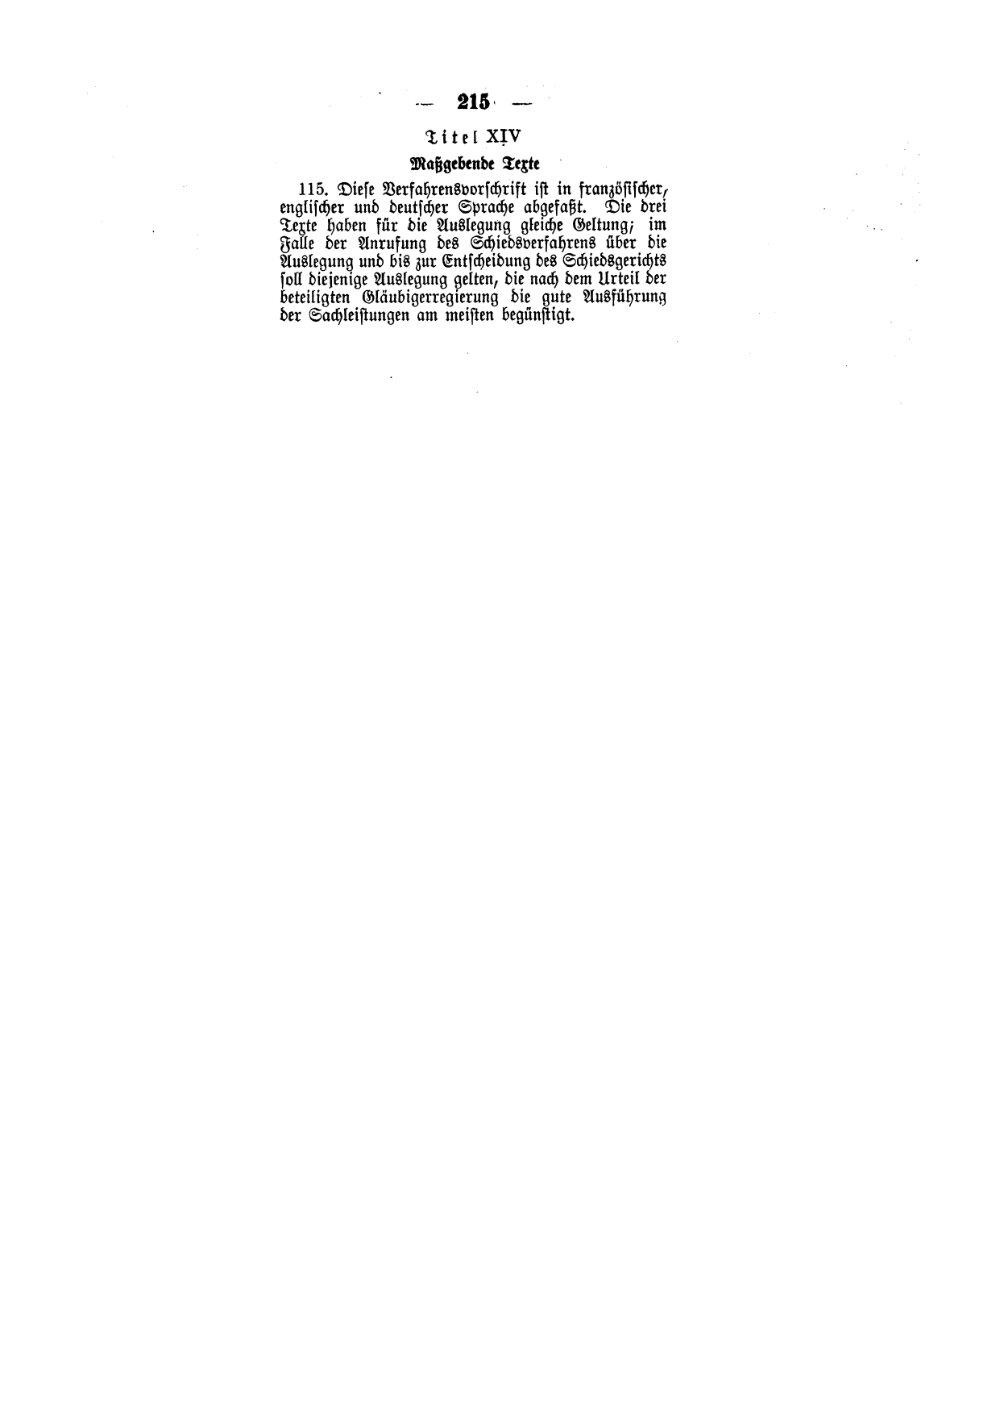 Scan of page 215